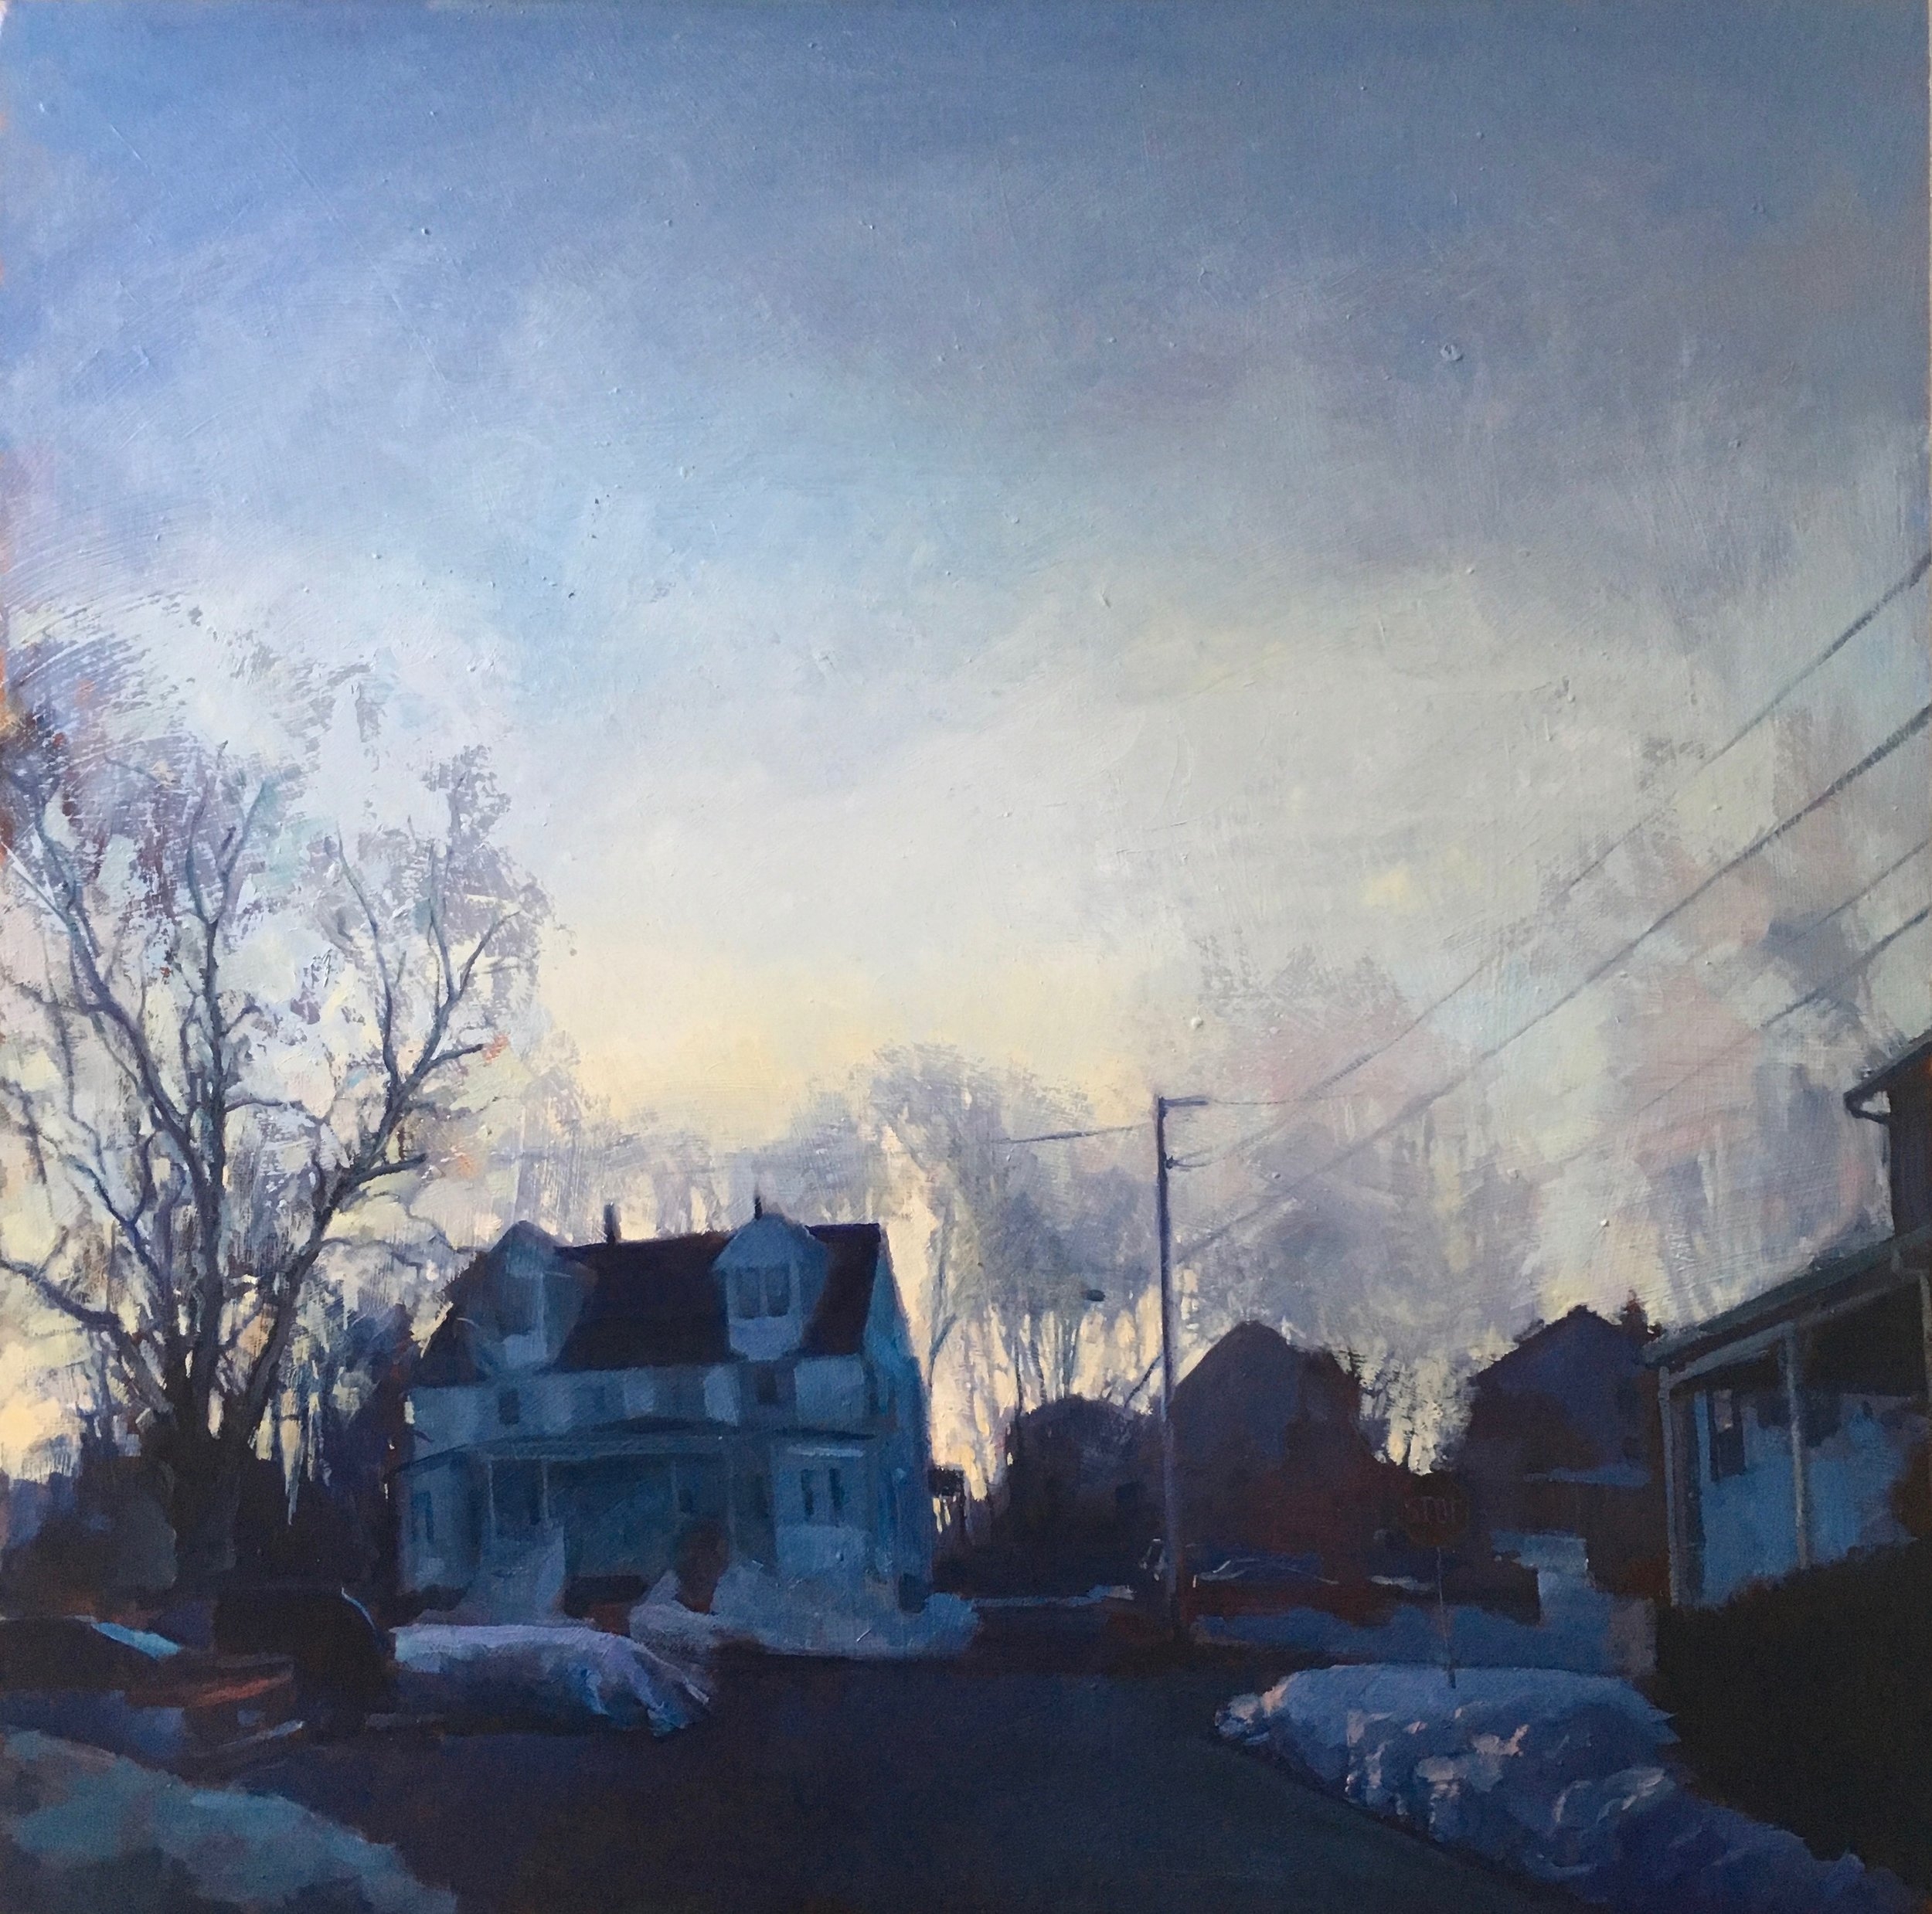 East Concord, oil on panel, 2'x2', 2018